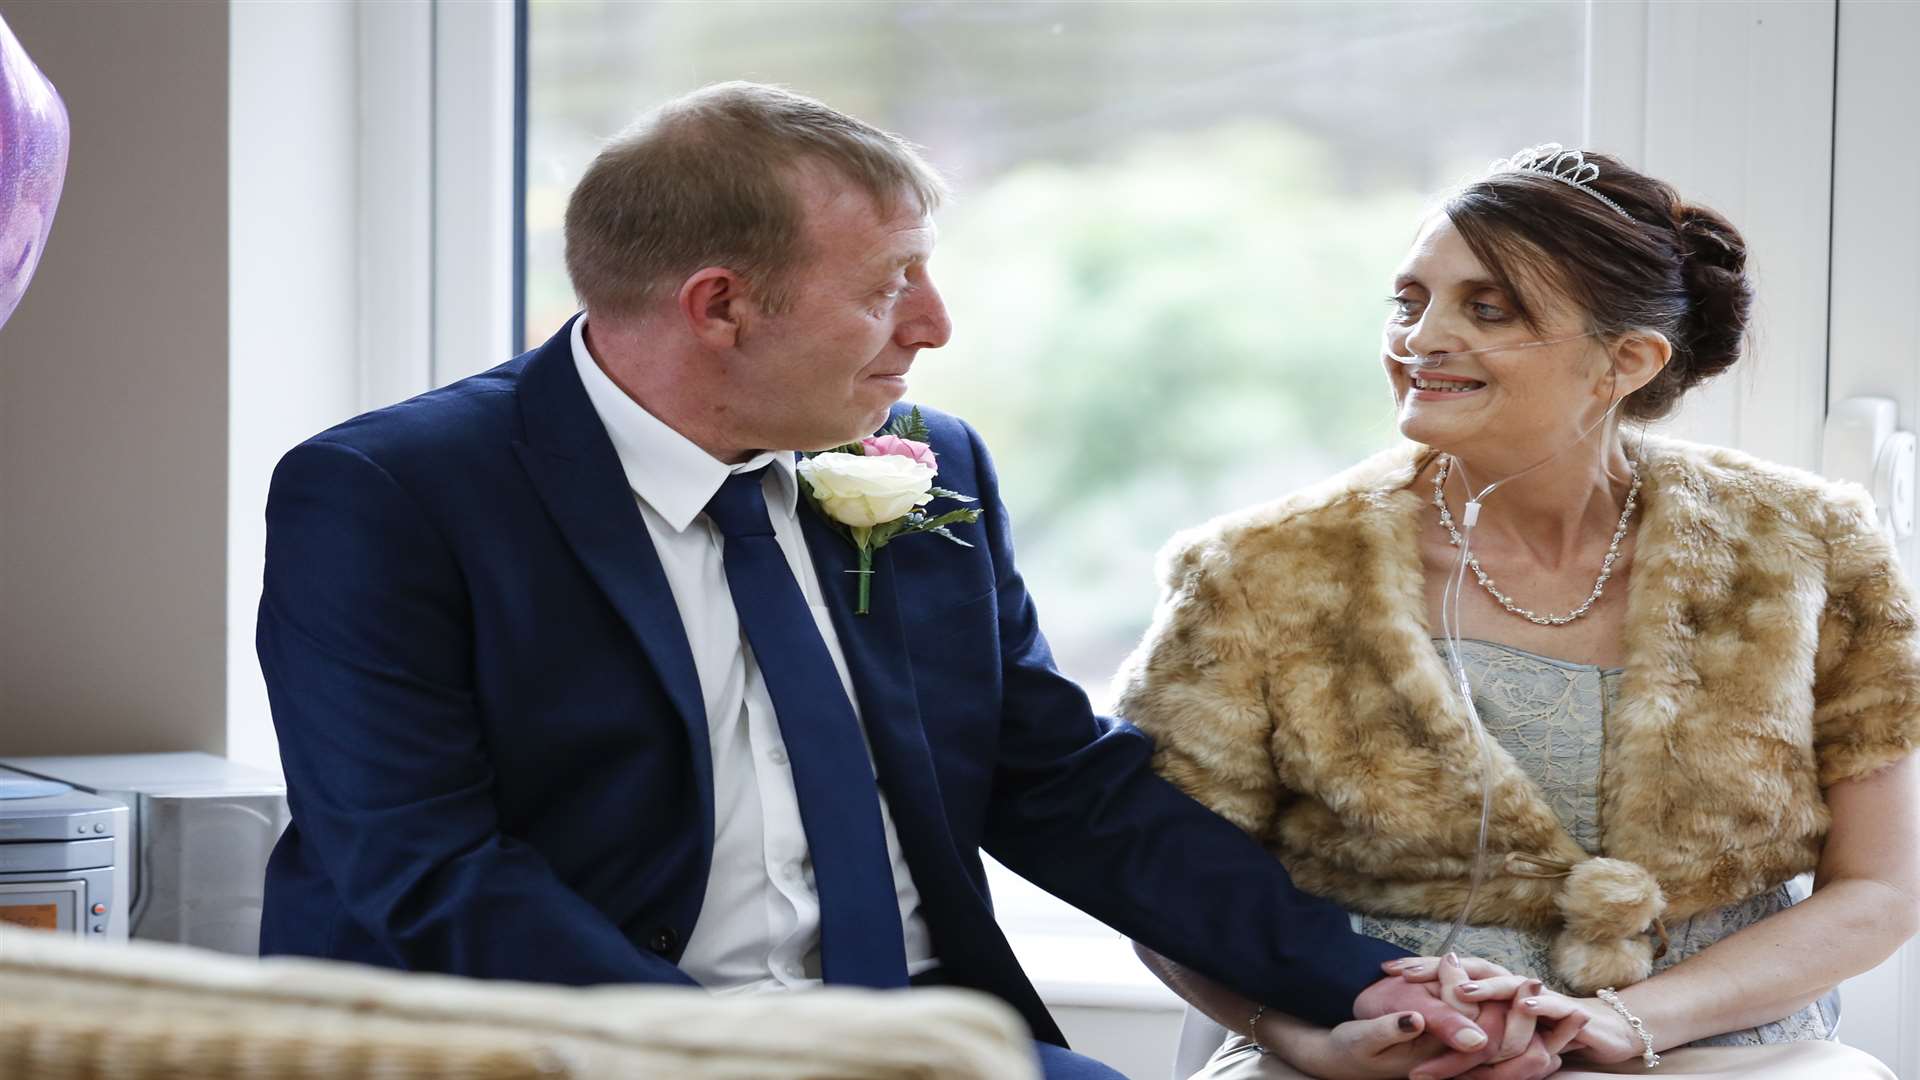 Tracey Deacon getting married at the hospice. Picture: Martin Apps